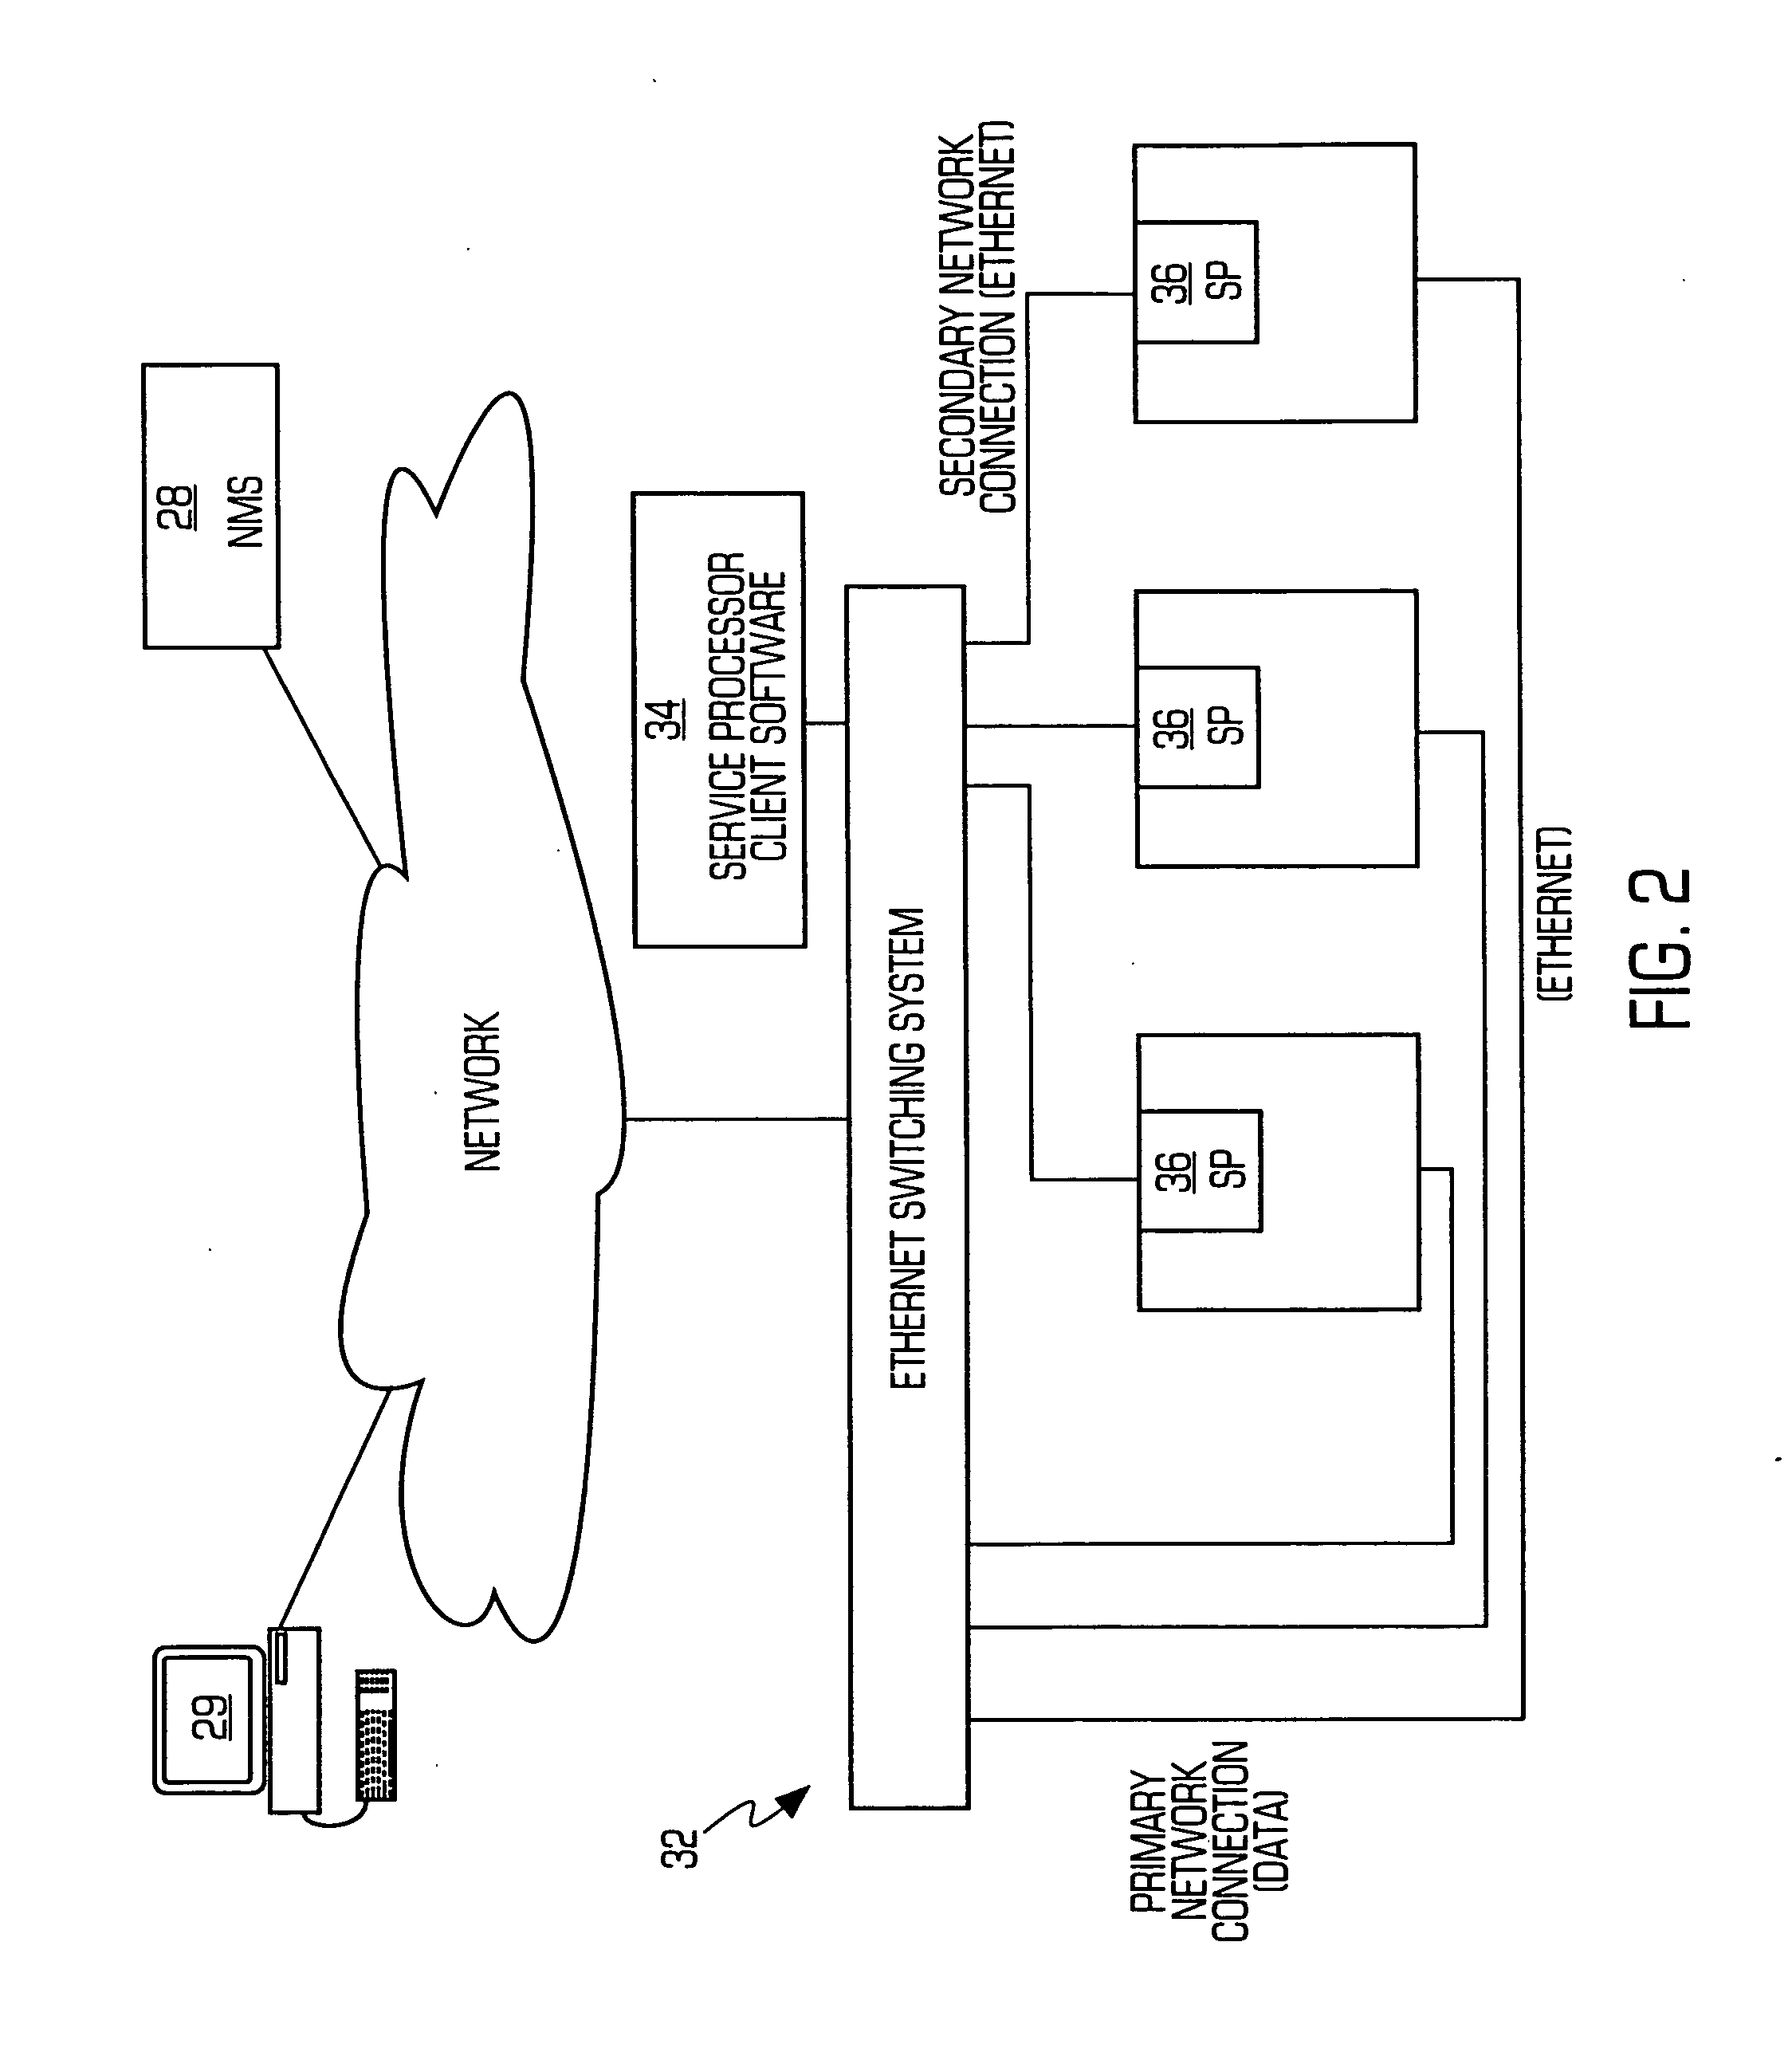 Service processor gateway system and appliance